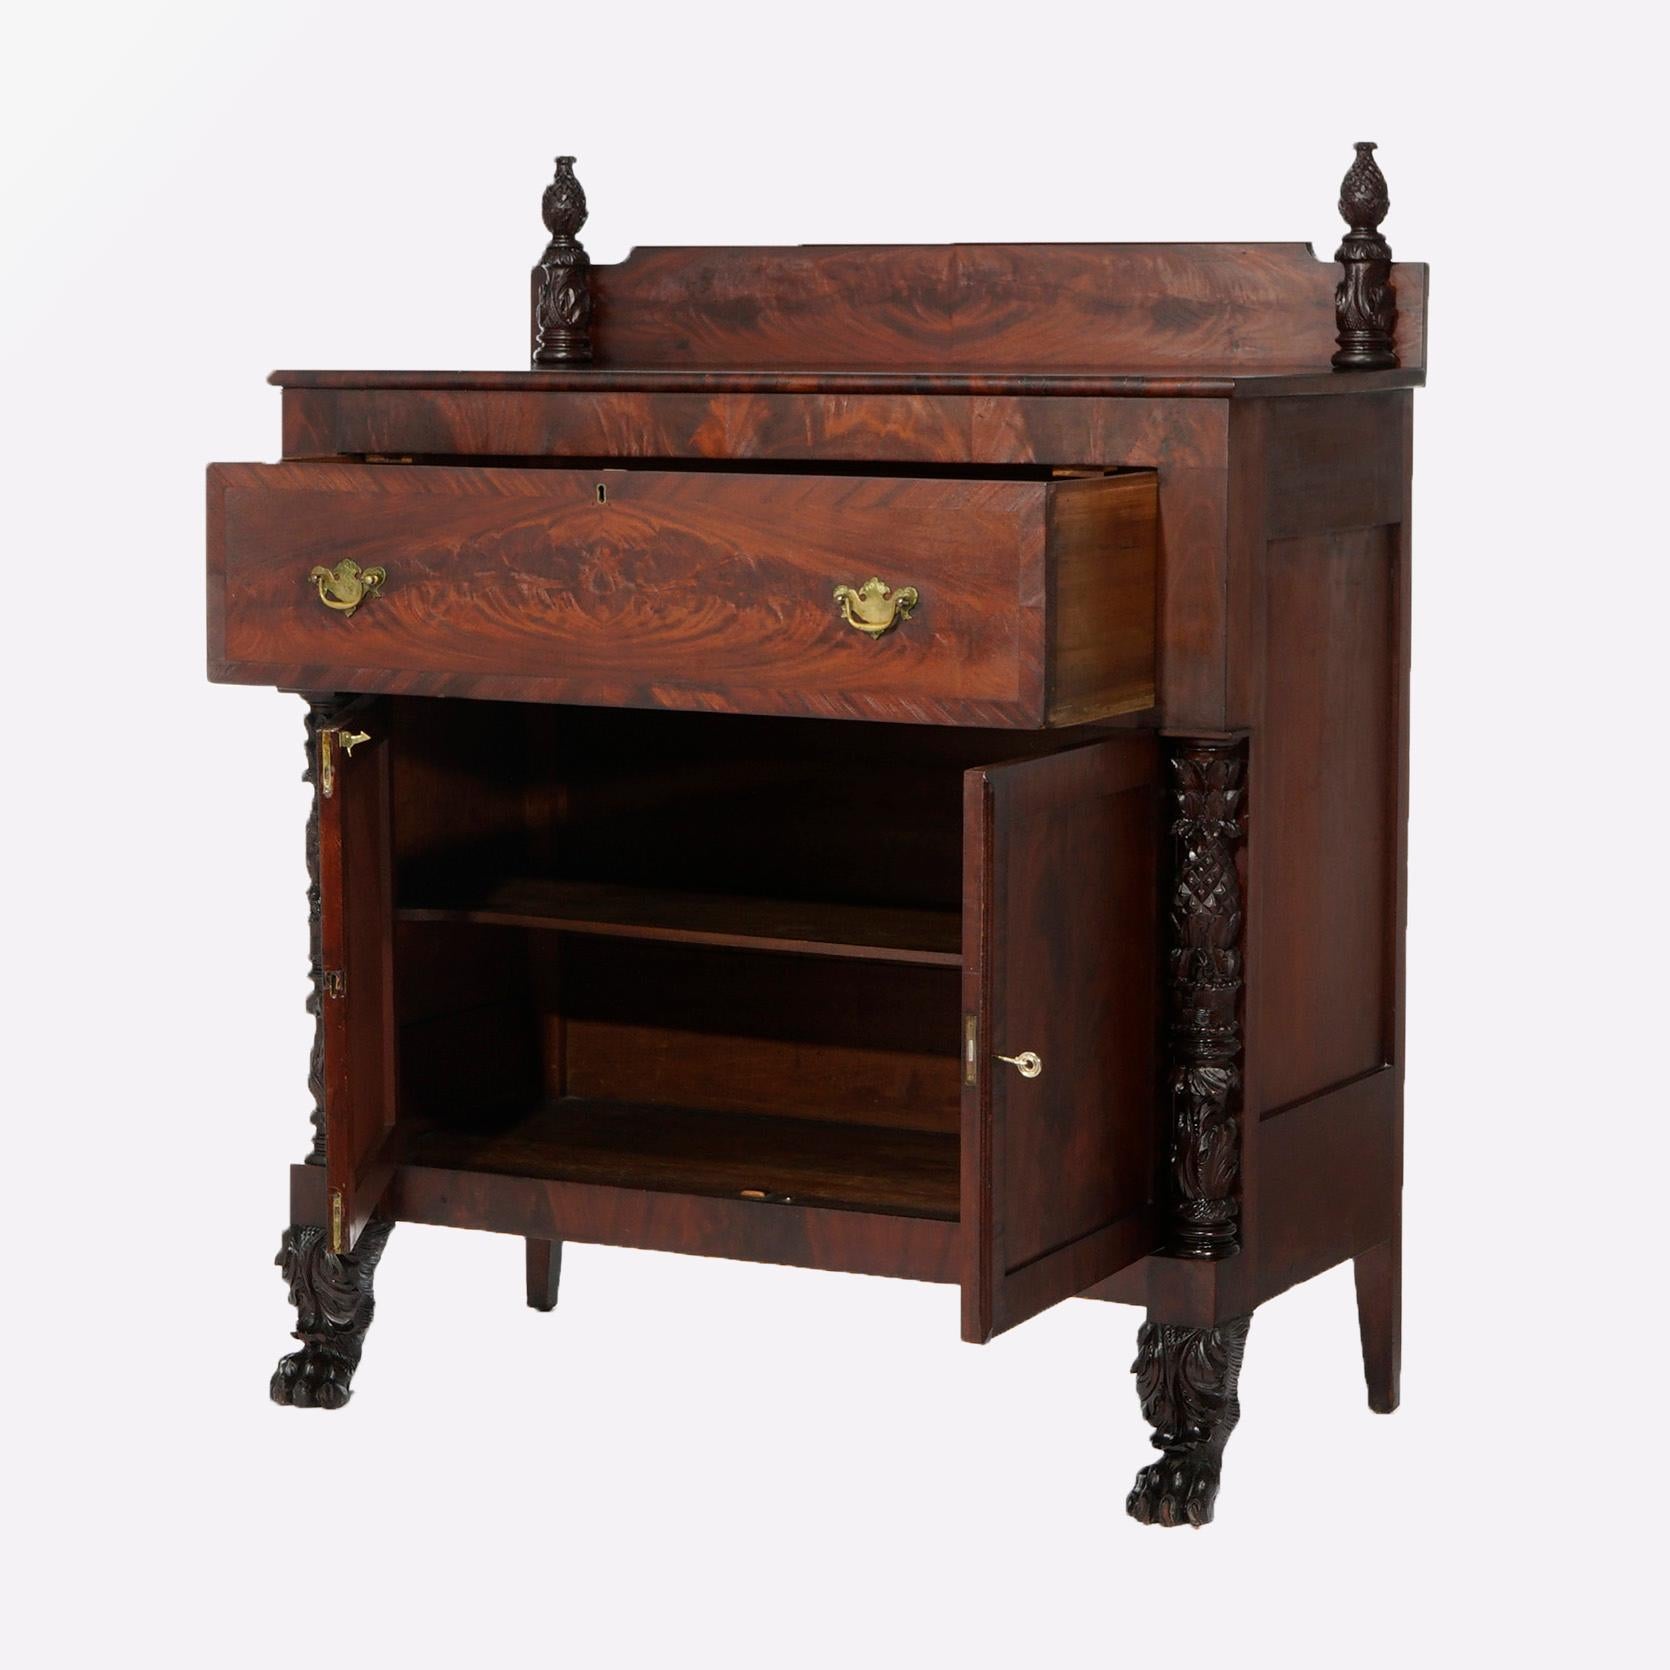 19th Century American Empire Neoclassical Carved Flame Mahogany Linen Press Sideboard c1840